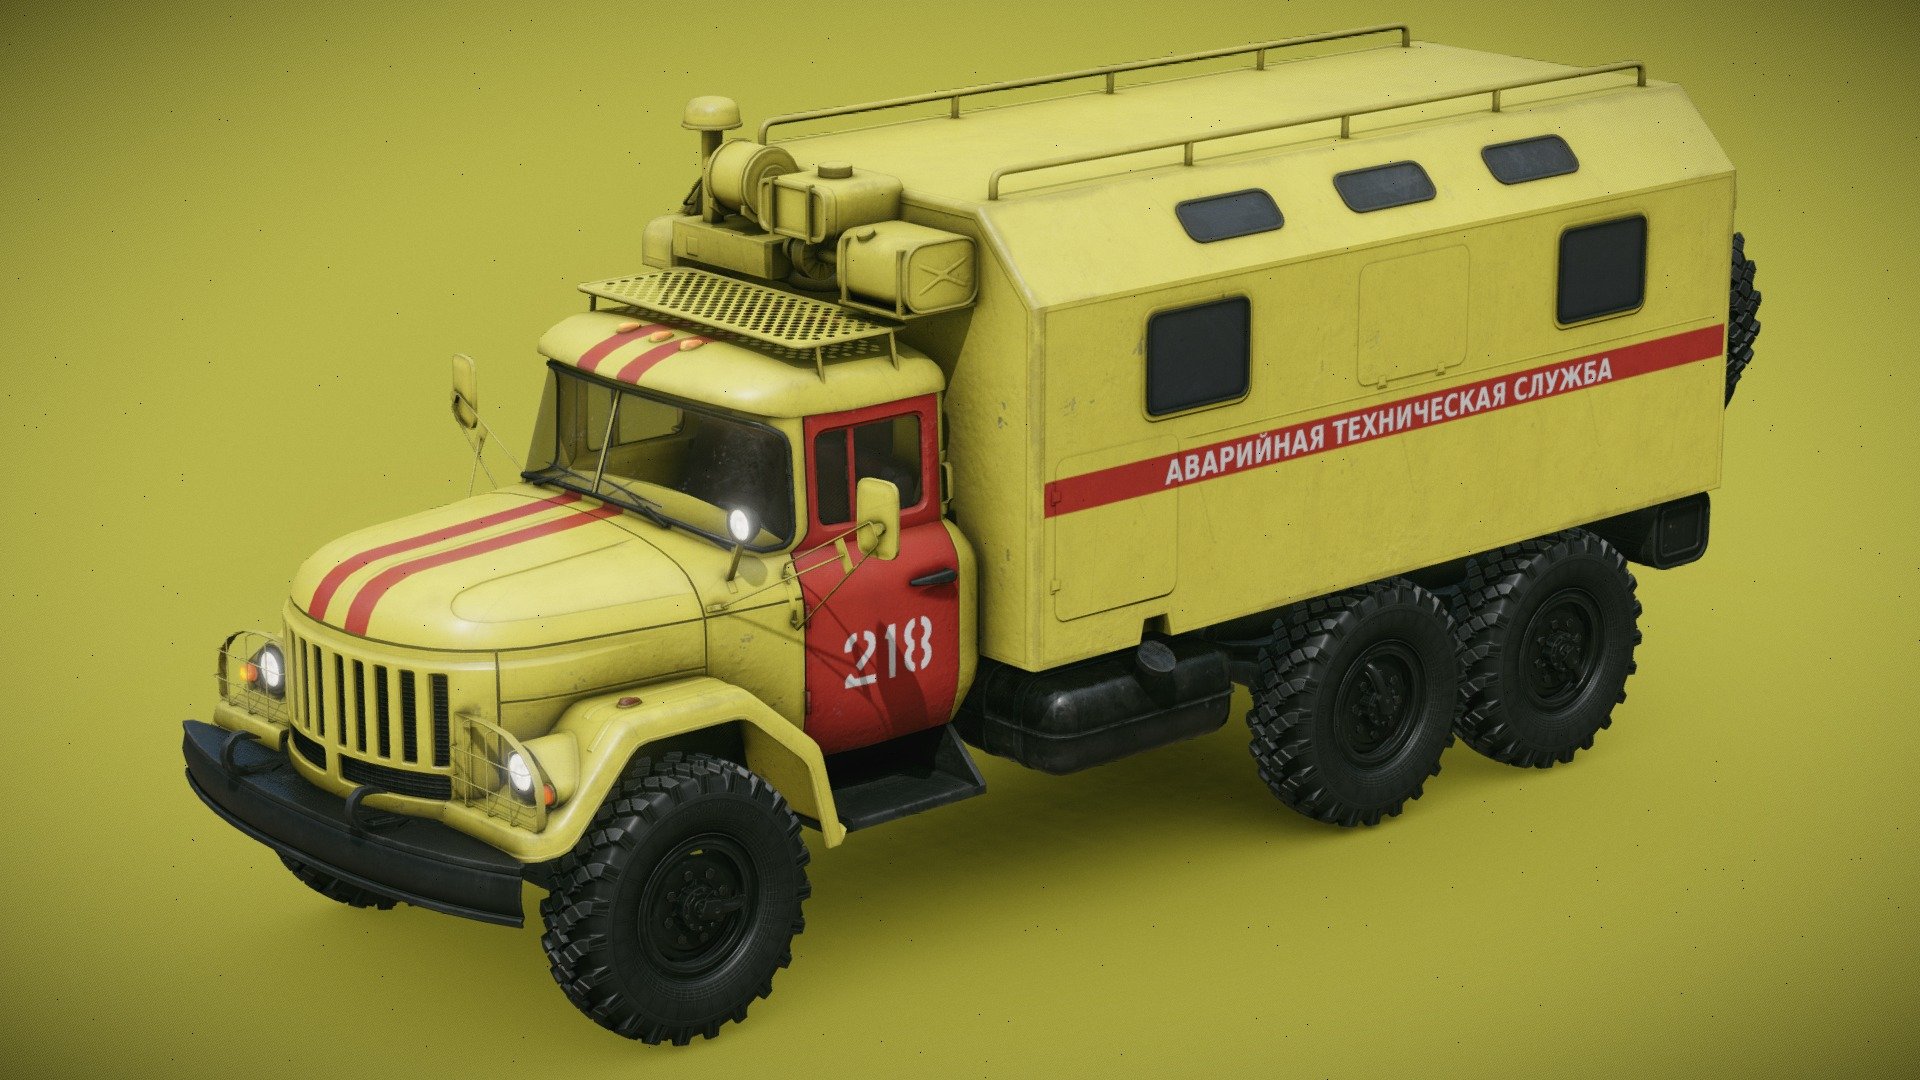 General purpose 3.5 tonne 6x6 truck designed in the Soviet Union. Here, in emergency services technial vehicle version.

Separate materials for: cabin, interior, glass, frame, wheel and command module.

Wheels are separate objects.

4k PBR textures for cabin, interior and command module. 2k for frame and wheel. 1k for the glass.

Textures for glass and command module with alpha transparency 3d model